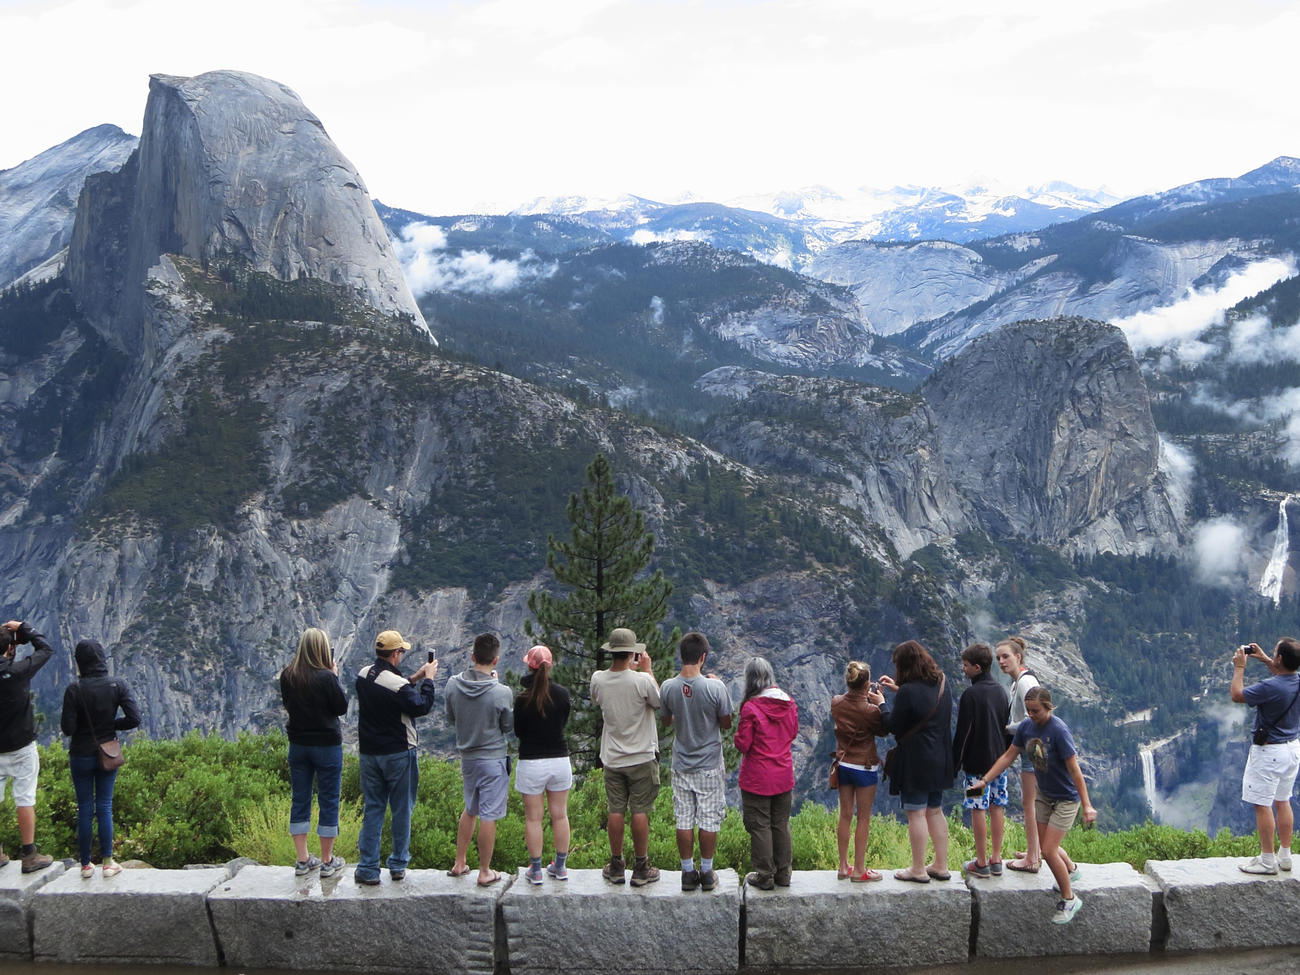 Free tomorrow: National parks, museums across the West